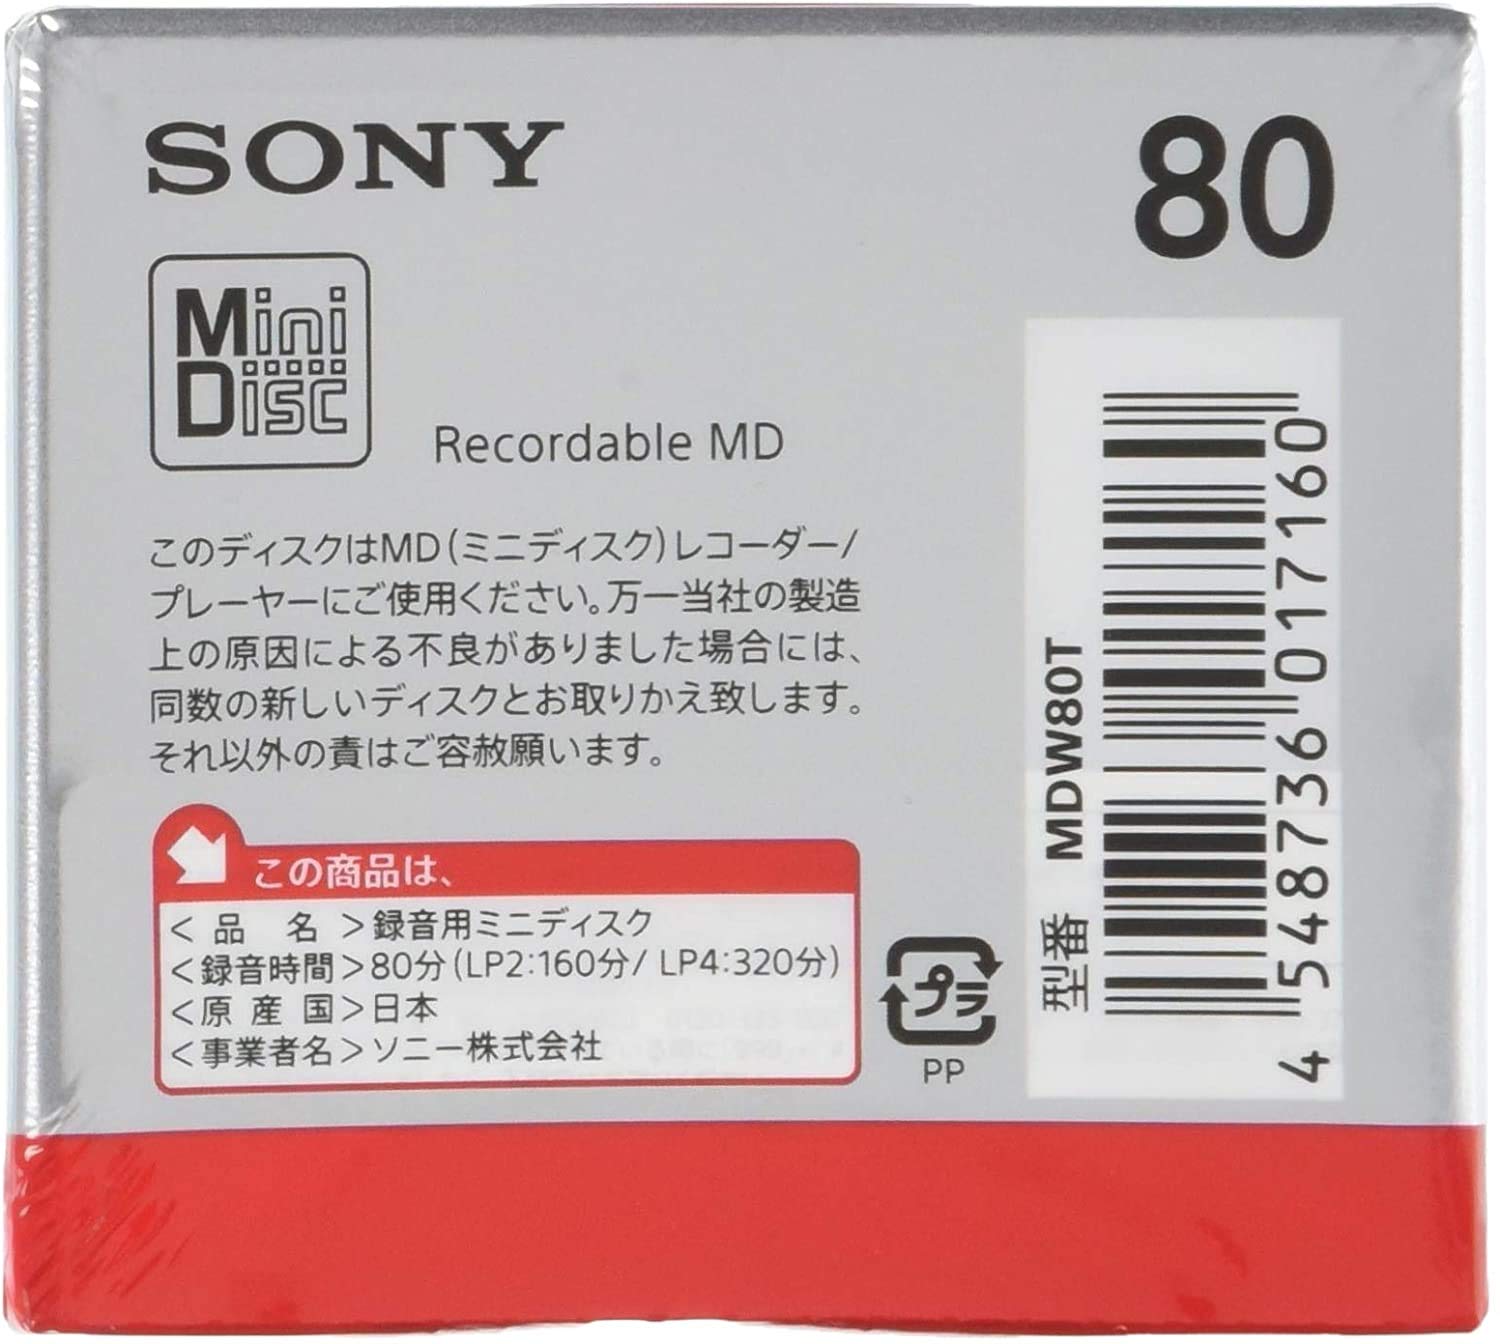 [5 Pcs Set] Sony MD80 Blank Mini Disc 80 Minutes Recordable MD Japan Genuine